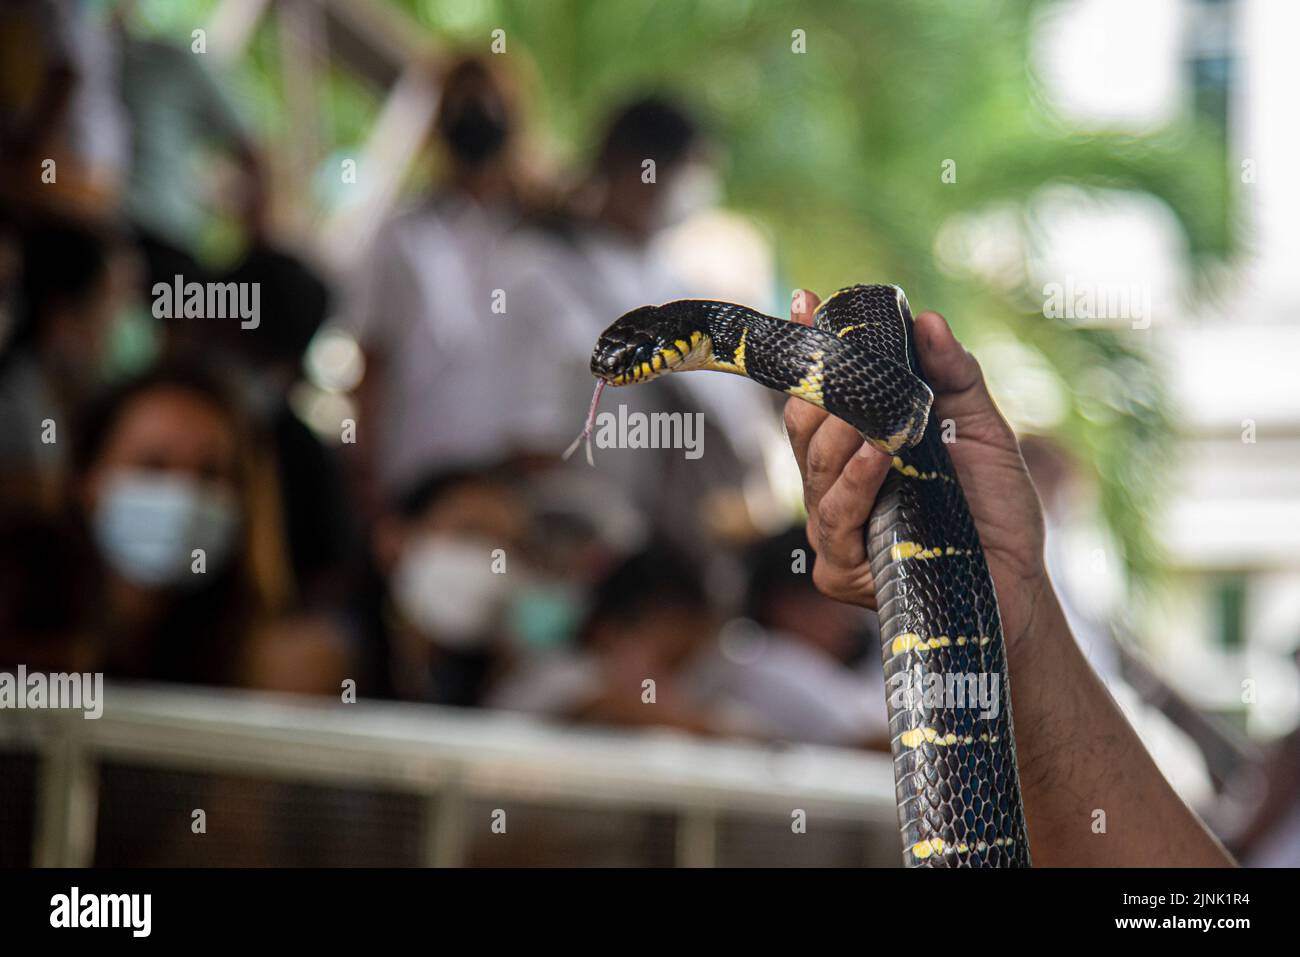 A Thai snake expert holds a venomous Mangrove snake during a snake show at the Queen Saovabha Memorial Institute and  Snake Farm in Bangkok. The Queen Saovabha Memorial Institute also known as the Bangkok Snake Farm was founded on 1923 to raised venomous snakes for venom extraction and production of antivenom for Thailand and surrounding regions where venomous snakes are endemic. The institute also serves as a museum to inform the general public about snakes in Thailand. (Photo by Peerapon Boonyakiat / SOPA Images/Sipa USA) Stock Photo